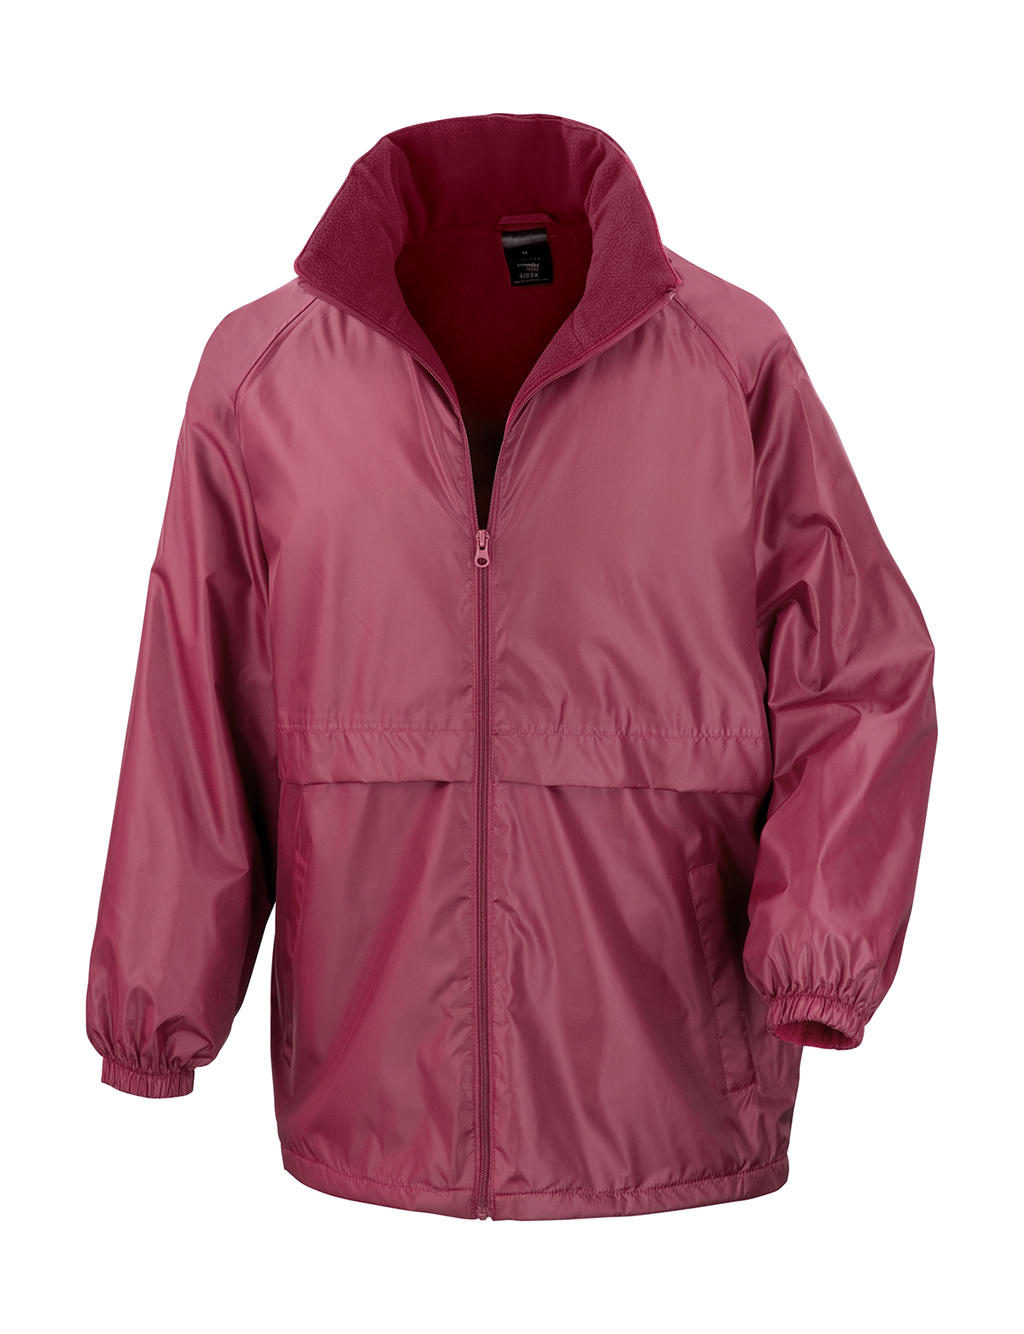  Microfleece Lined Jacket in Farbe Burgundy